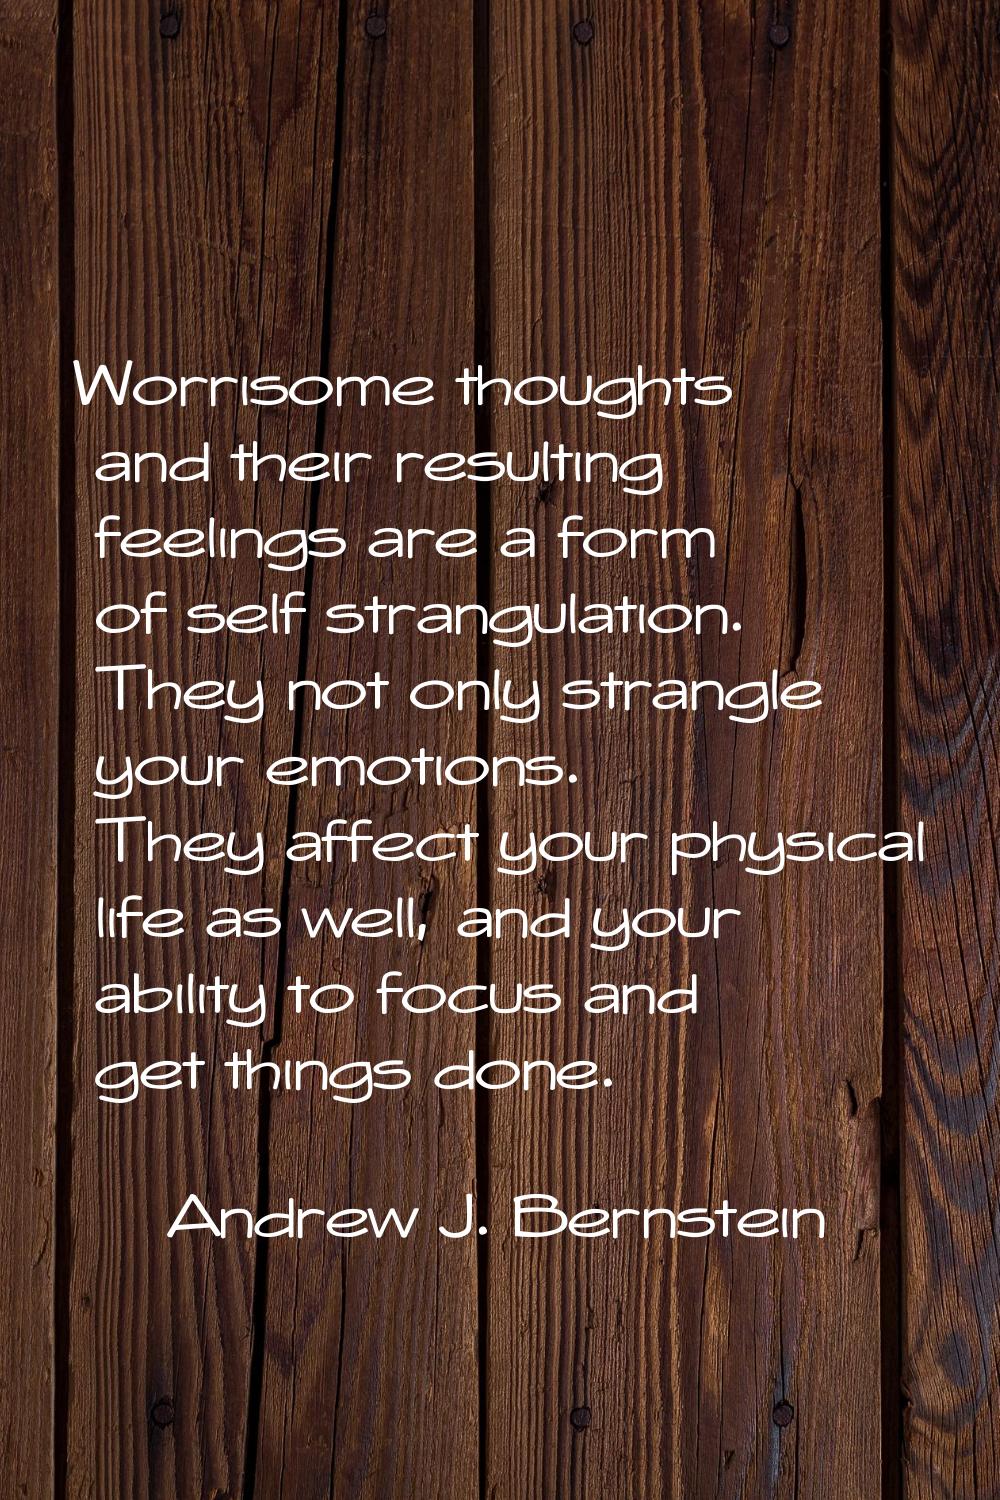 Worrisome thoughts and their resulting feelings are a form of self strangulation. They not only str